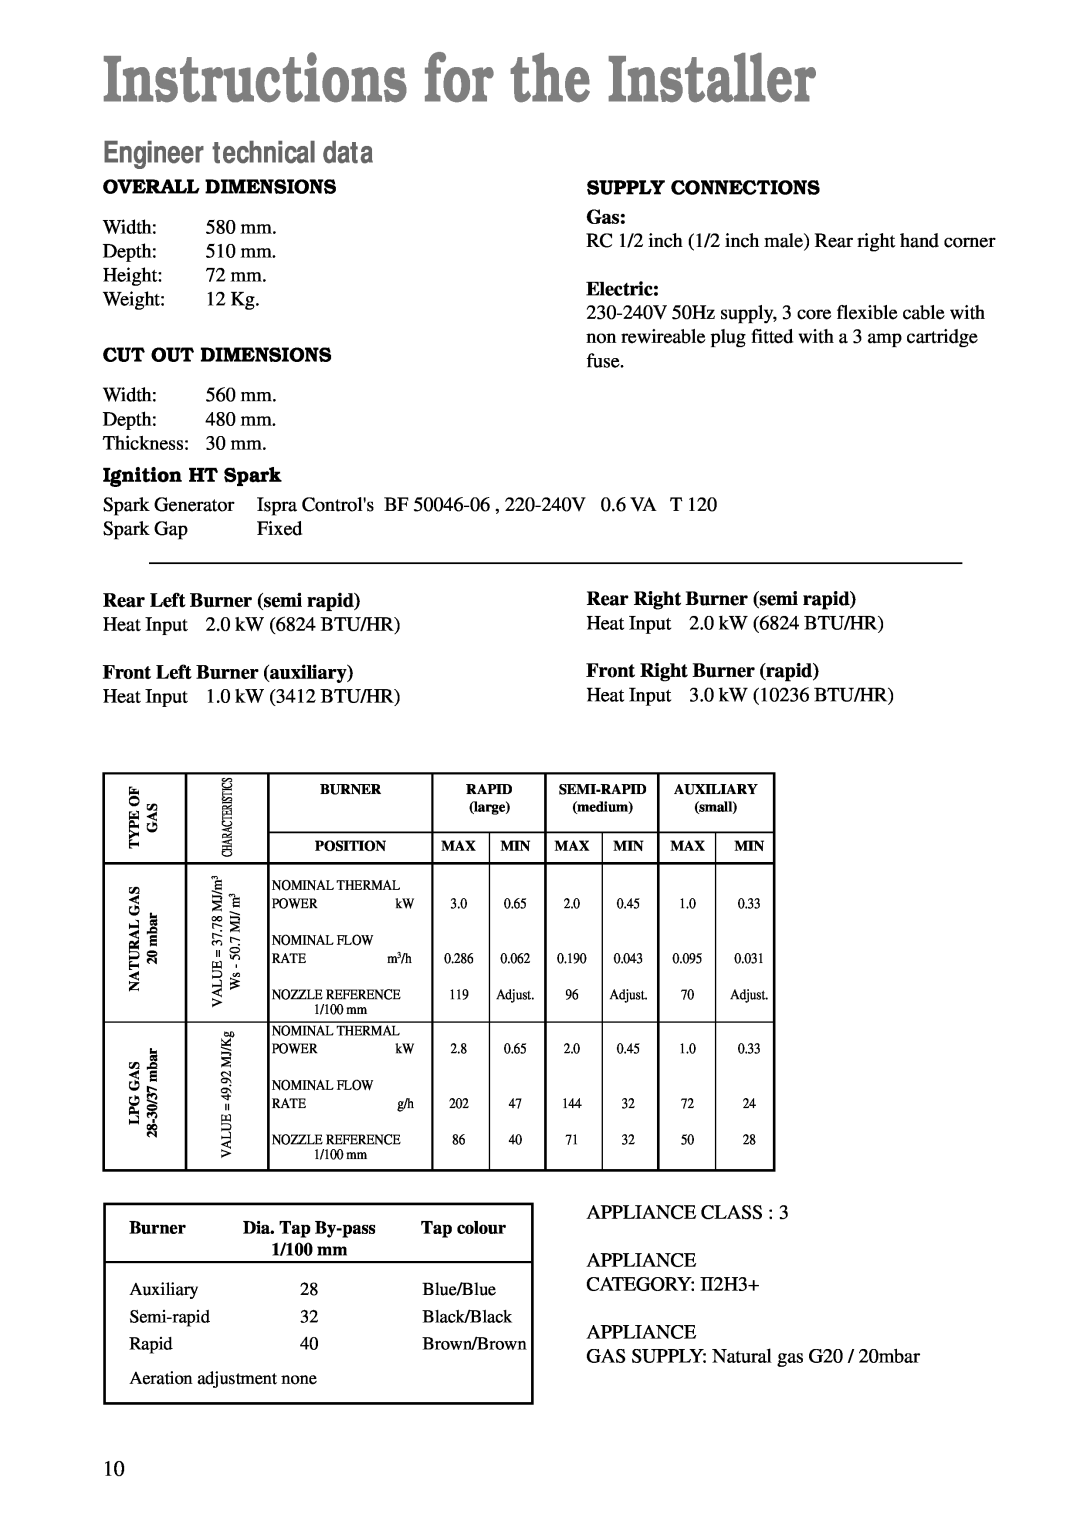 Zanussi ZGF 642 Instructions for the Installer, Engineer technical data, Overall Dimensions, Cut Out Dimensions, Electric 